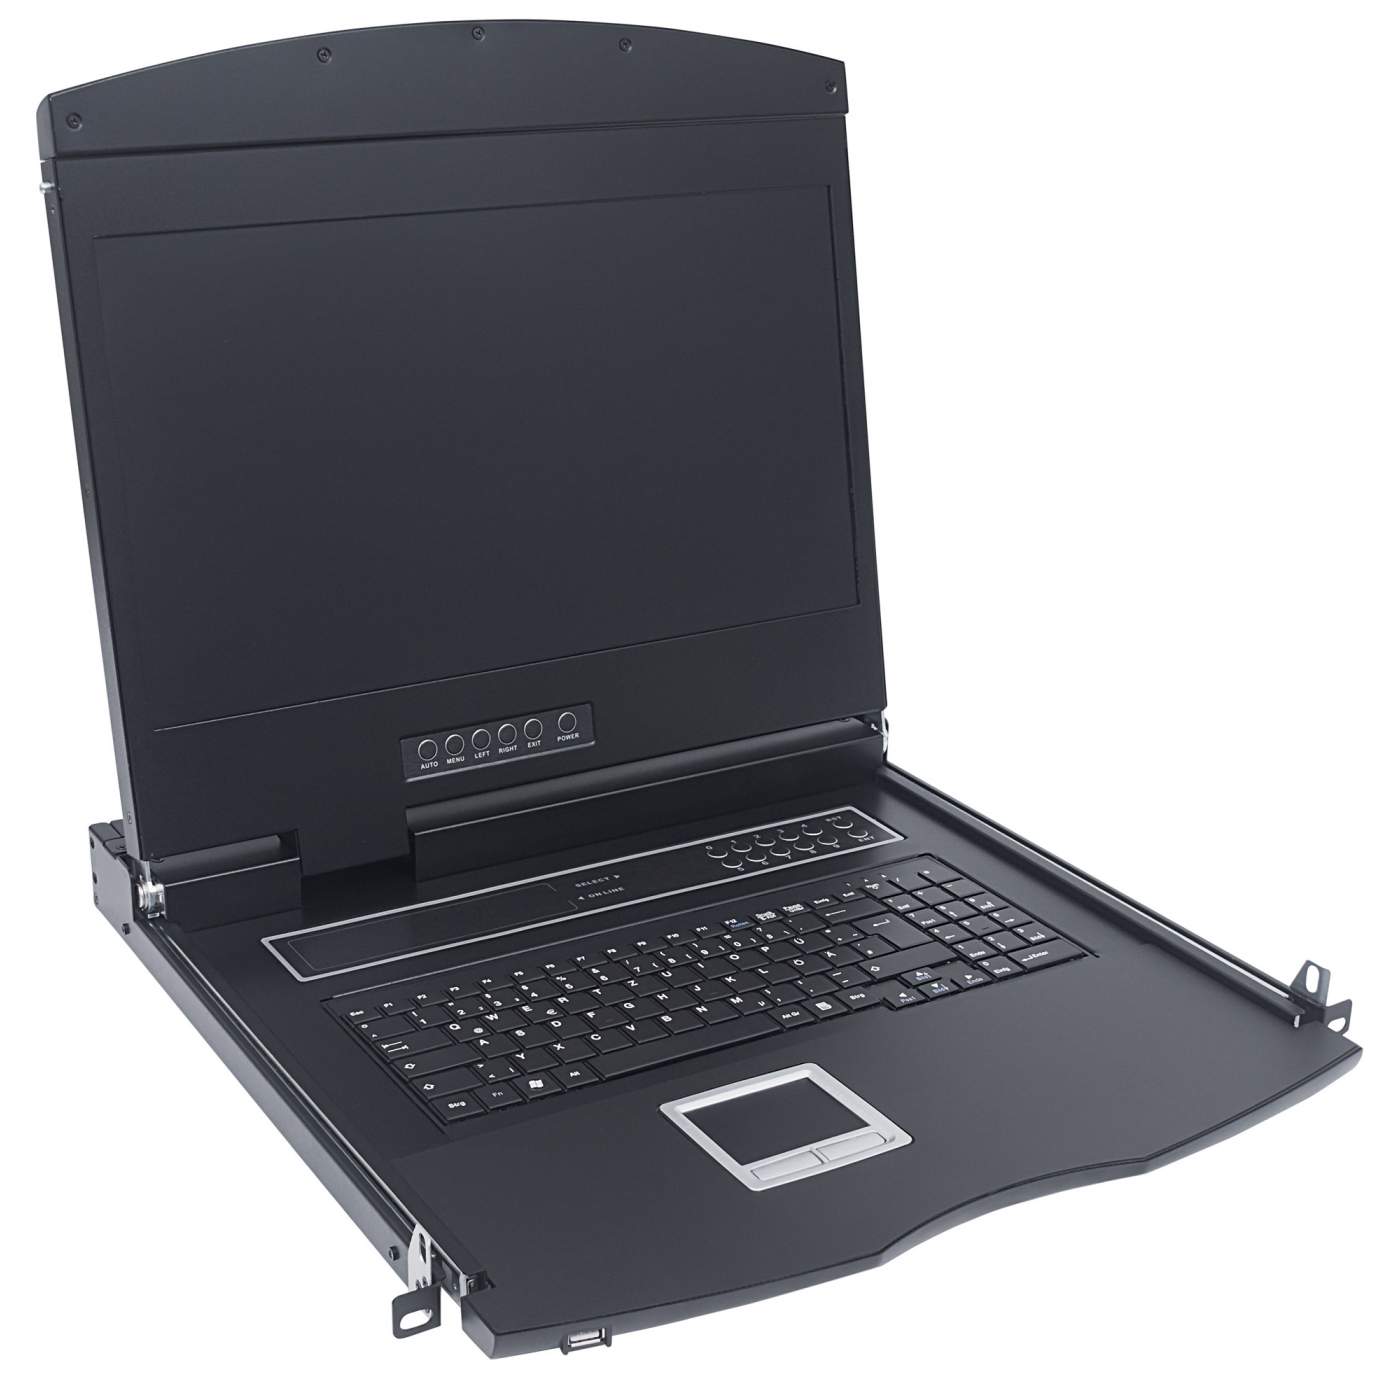 Rackmount 17" LCD Console Image 2